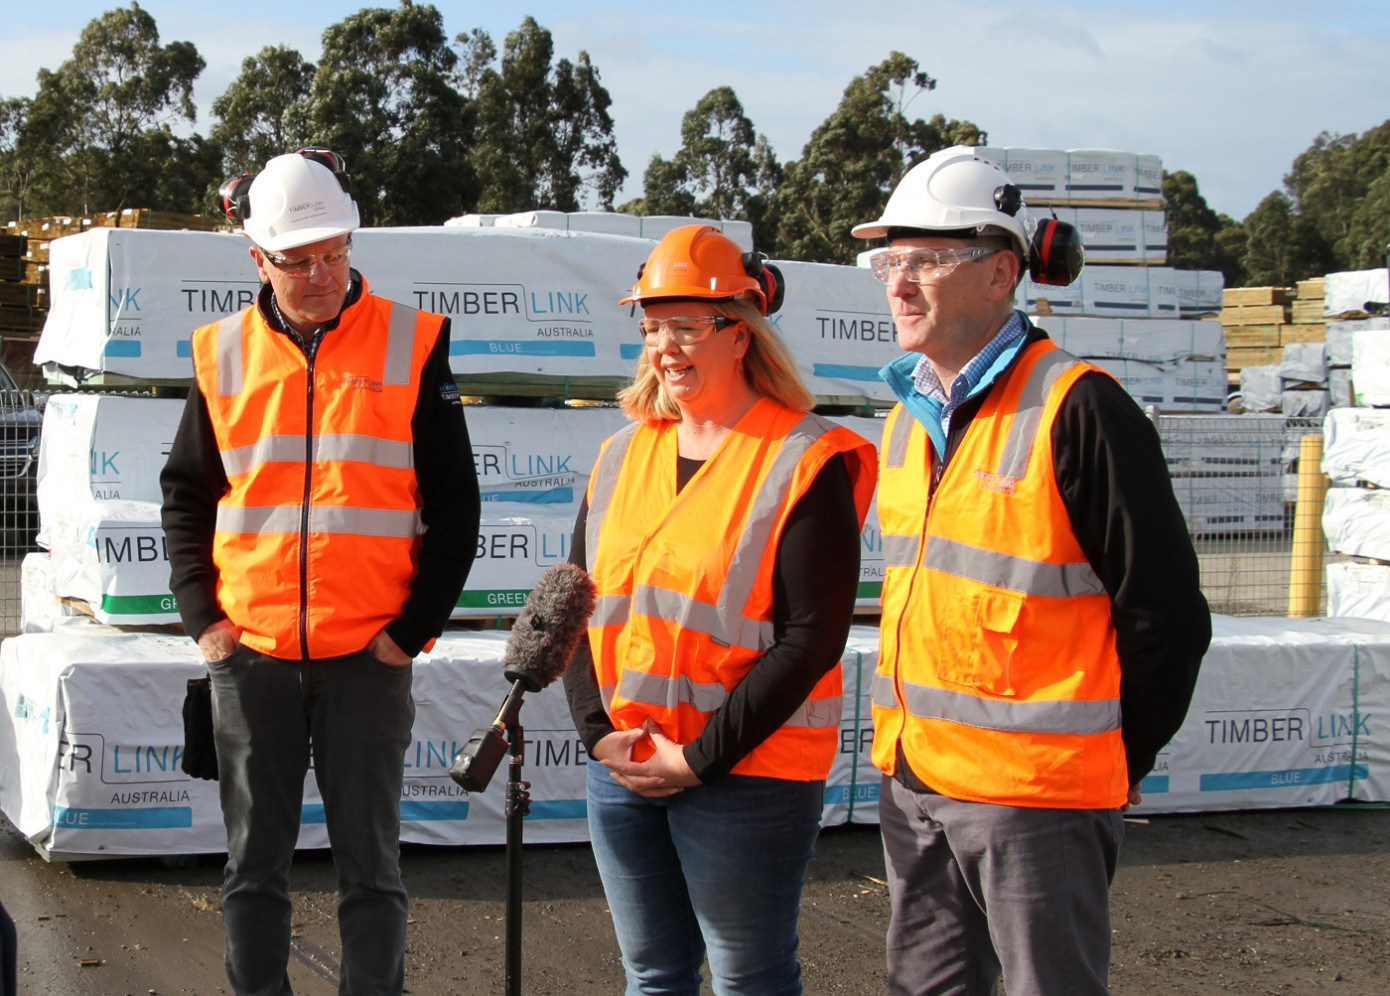 Timberlink unveils world-class scanning system at Bell Bay in Tasmania